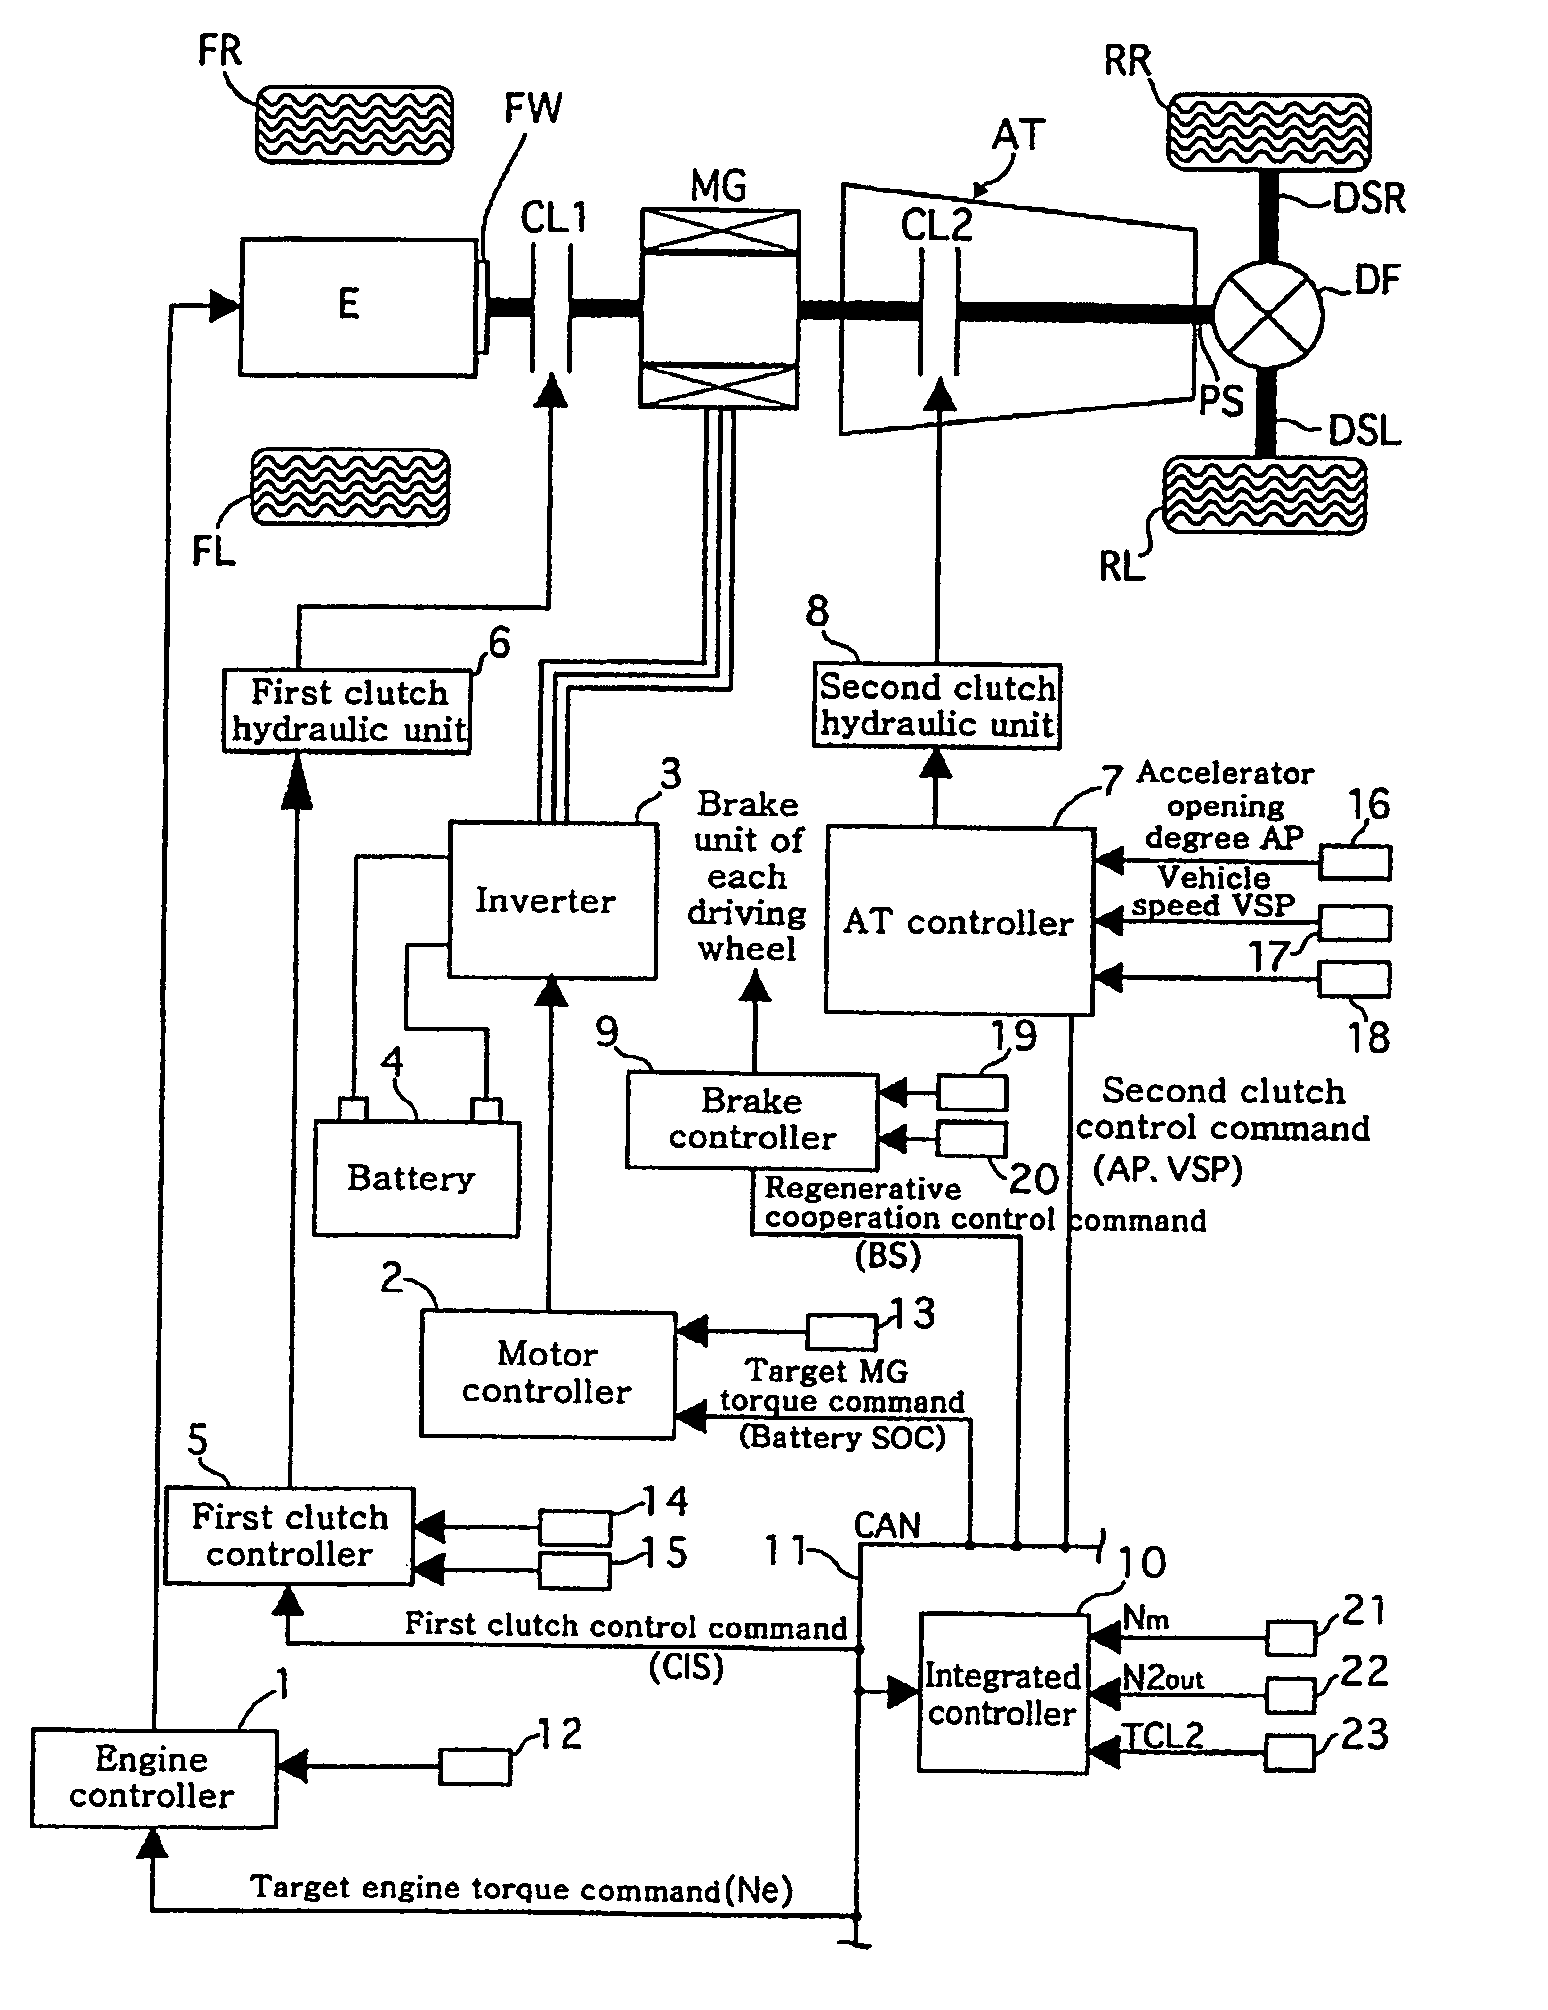 Control Unit For Controlling An Engine Stop Of A Hybrid Vehicle